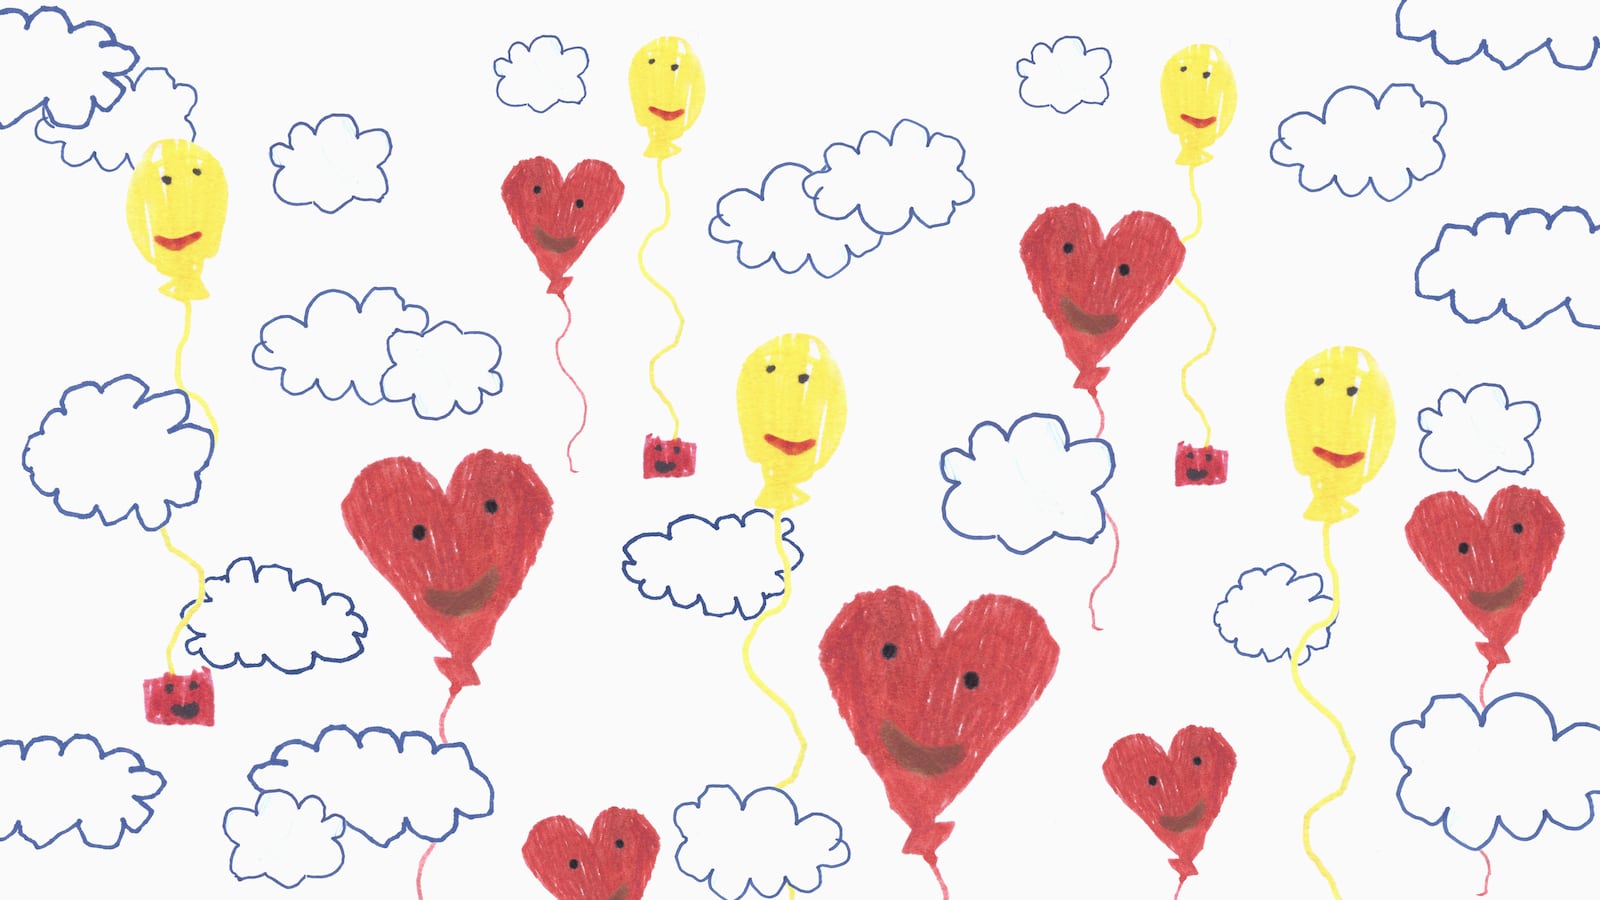 Child’s drawing of yellow and red balloons in the clouds.